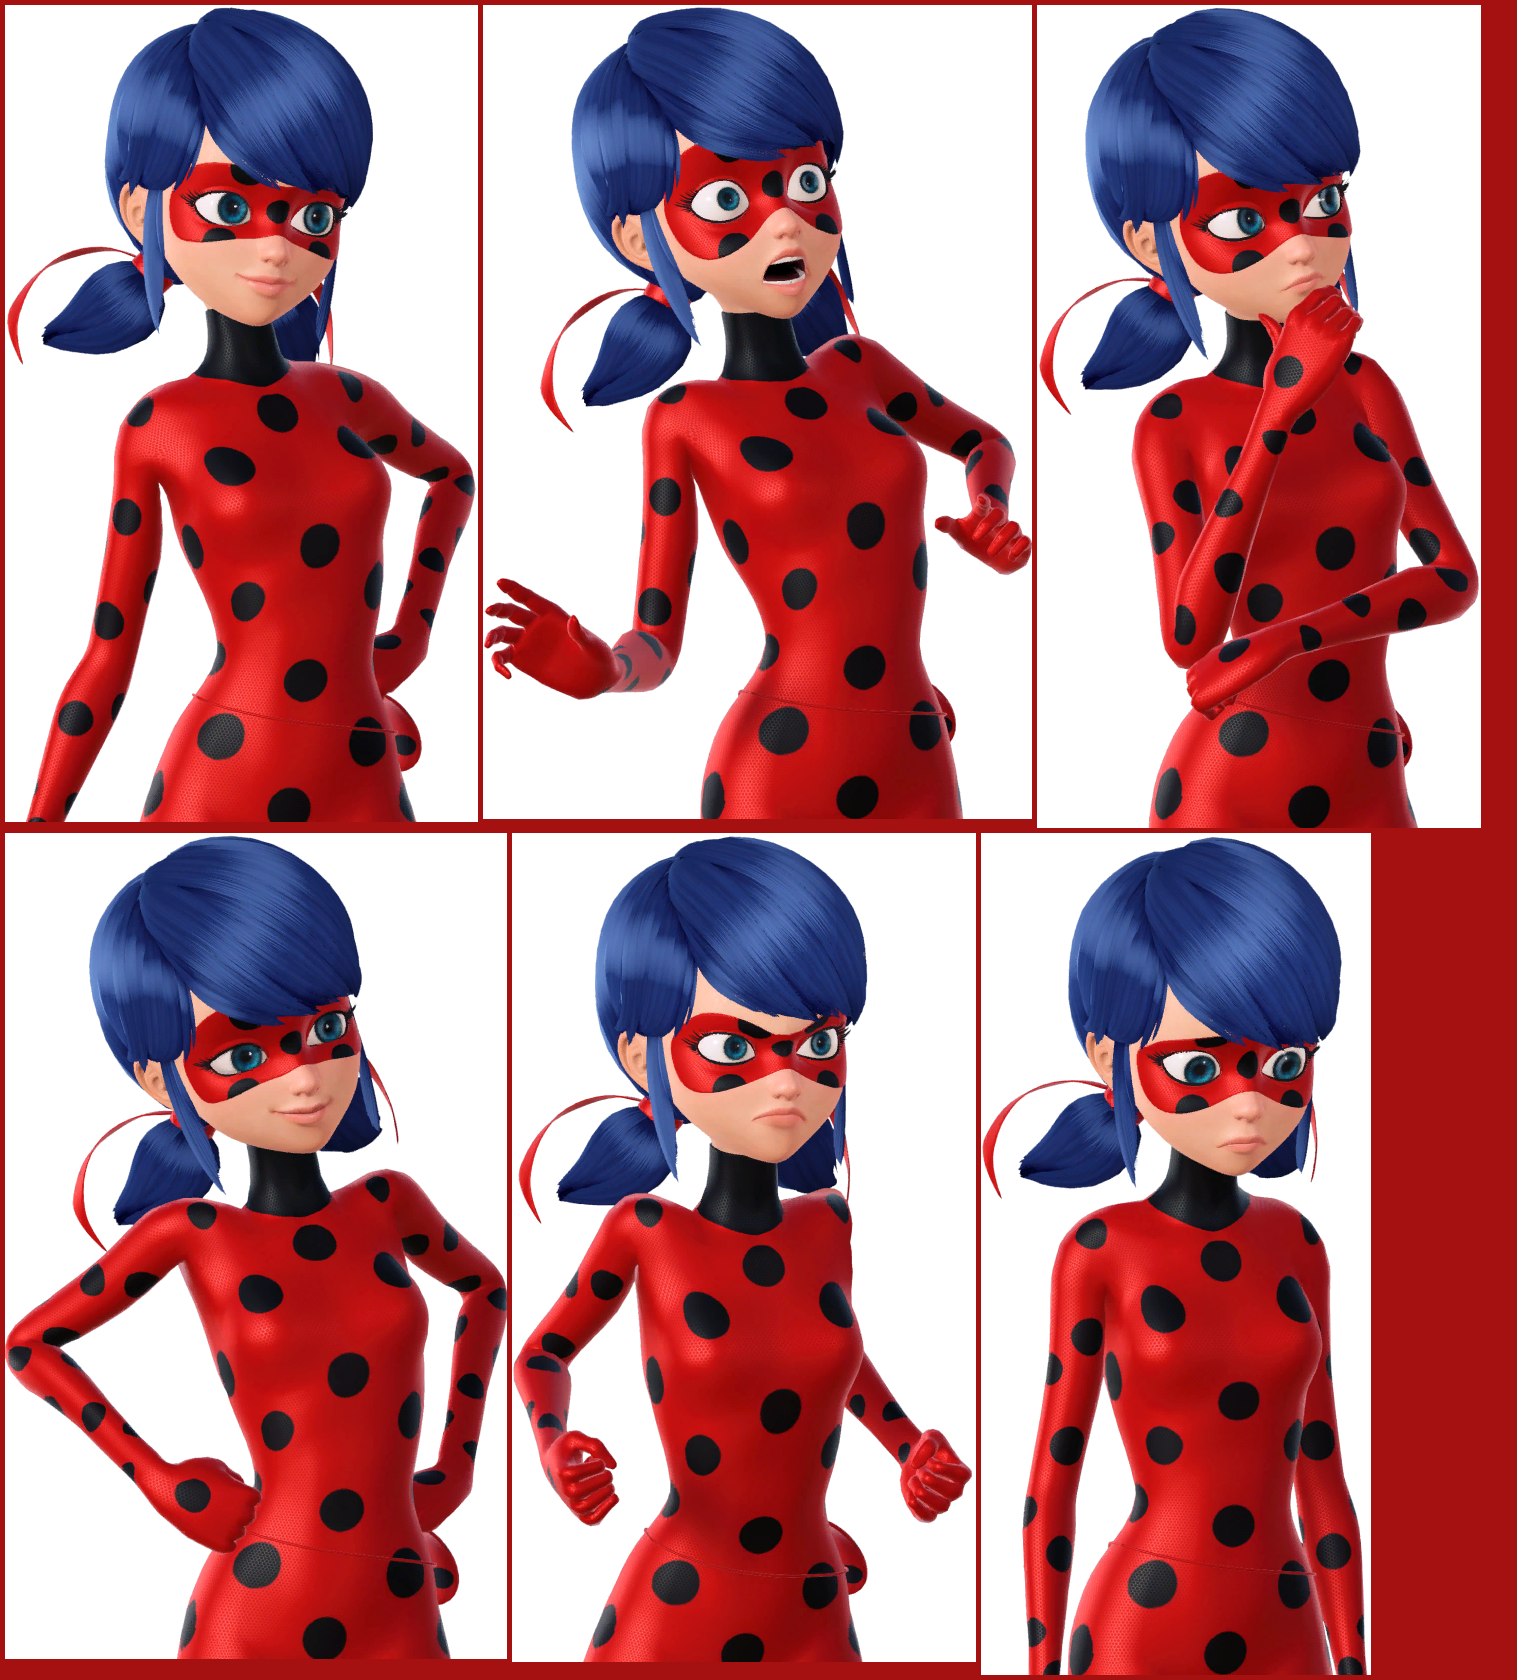 Miraculous: Rise of the Sphinx - Ladybug